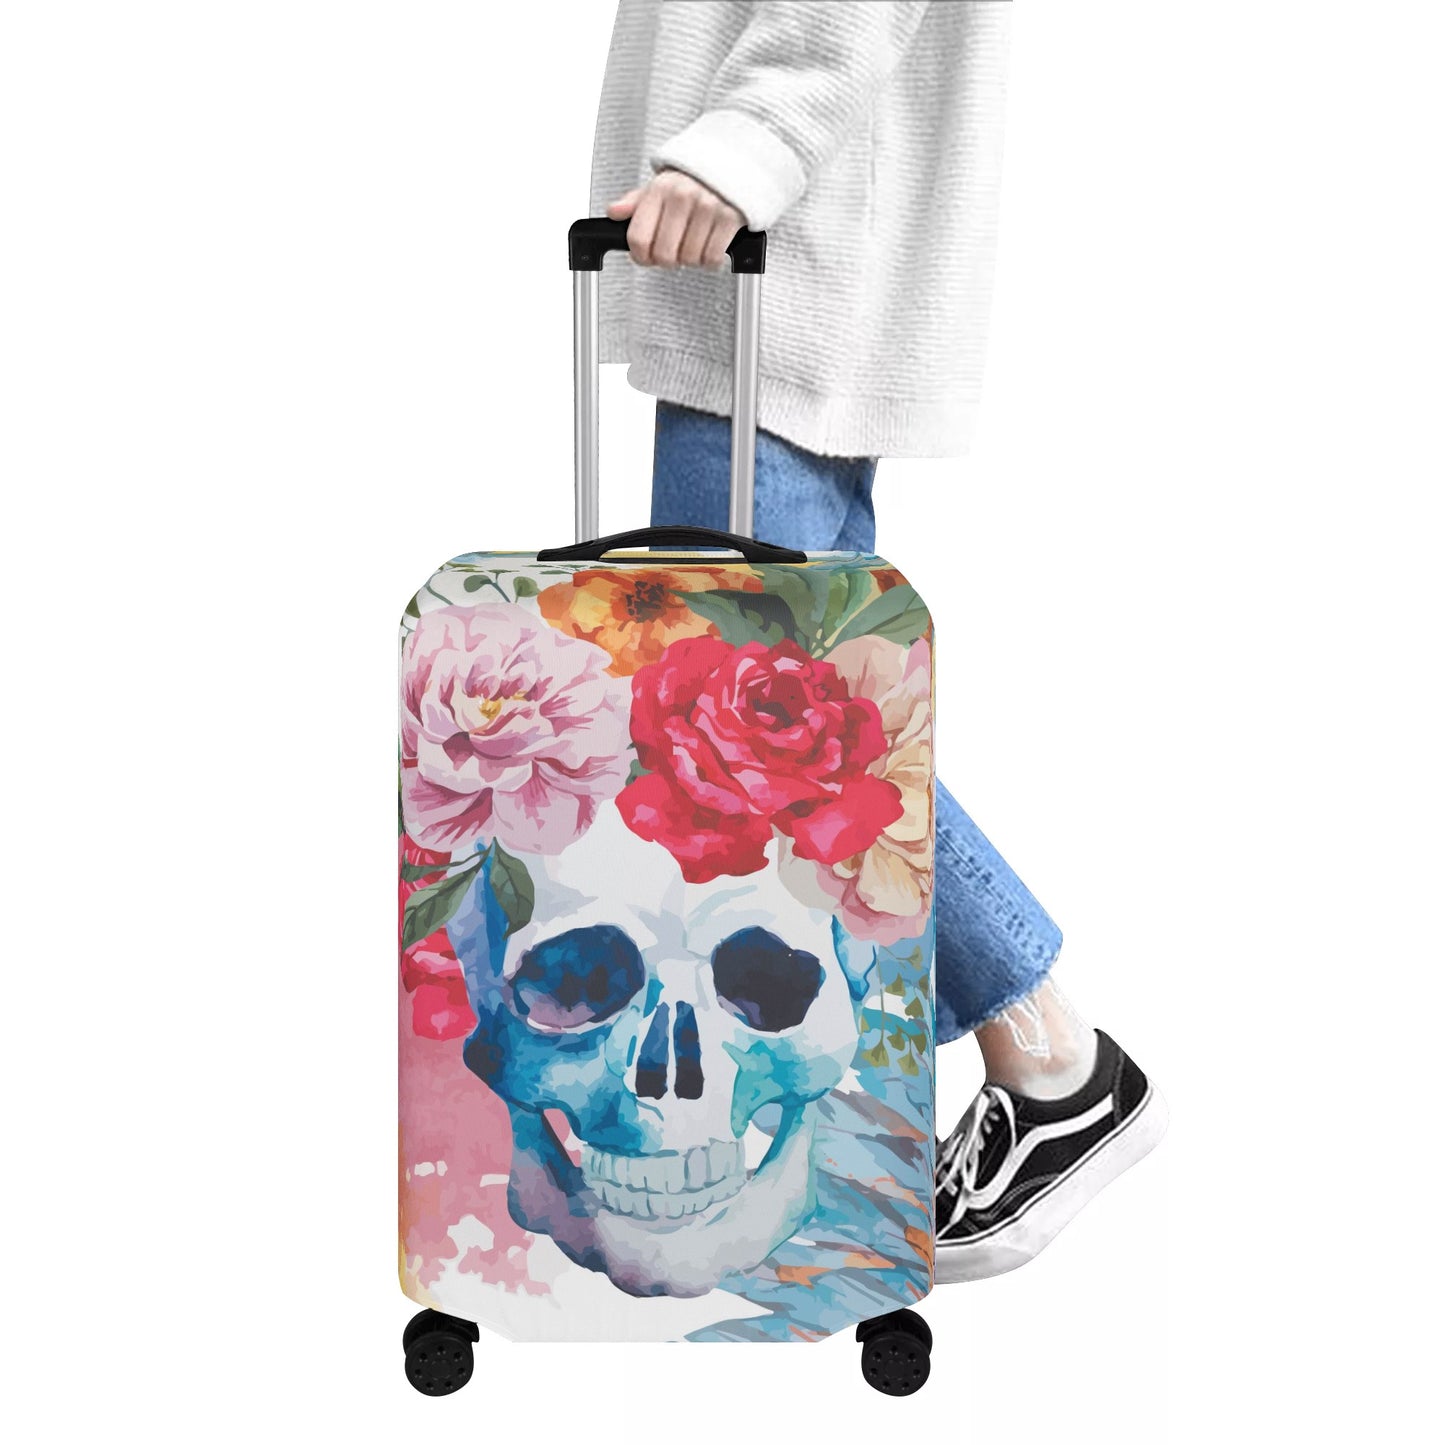 Floral skull Polyester Luggage Cover